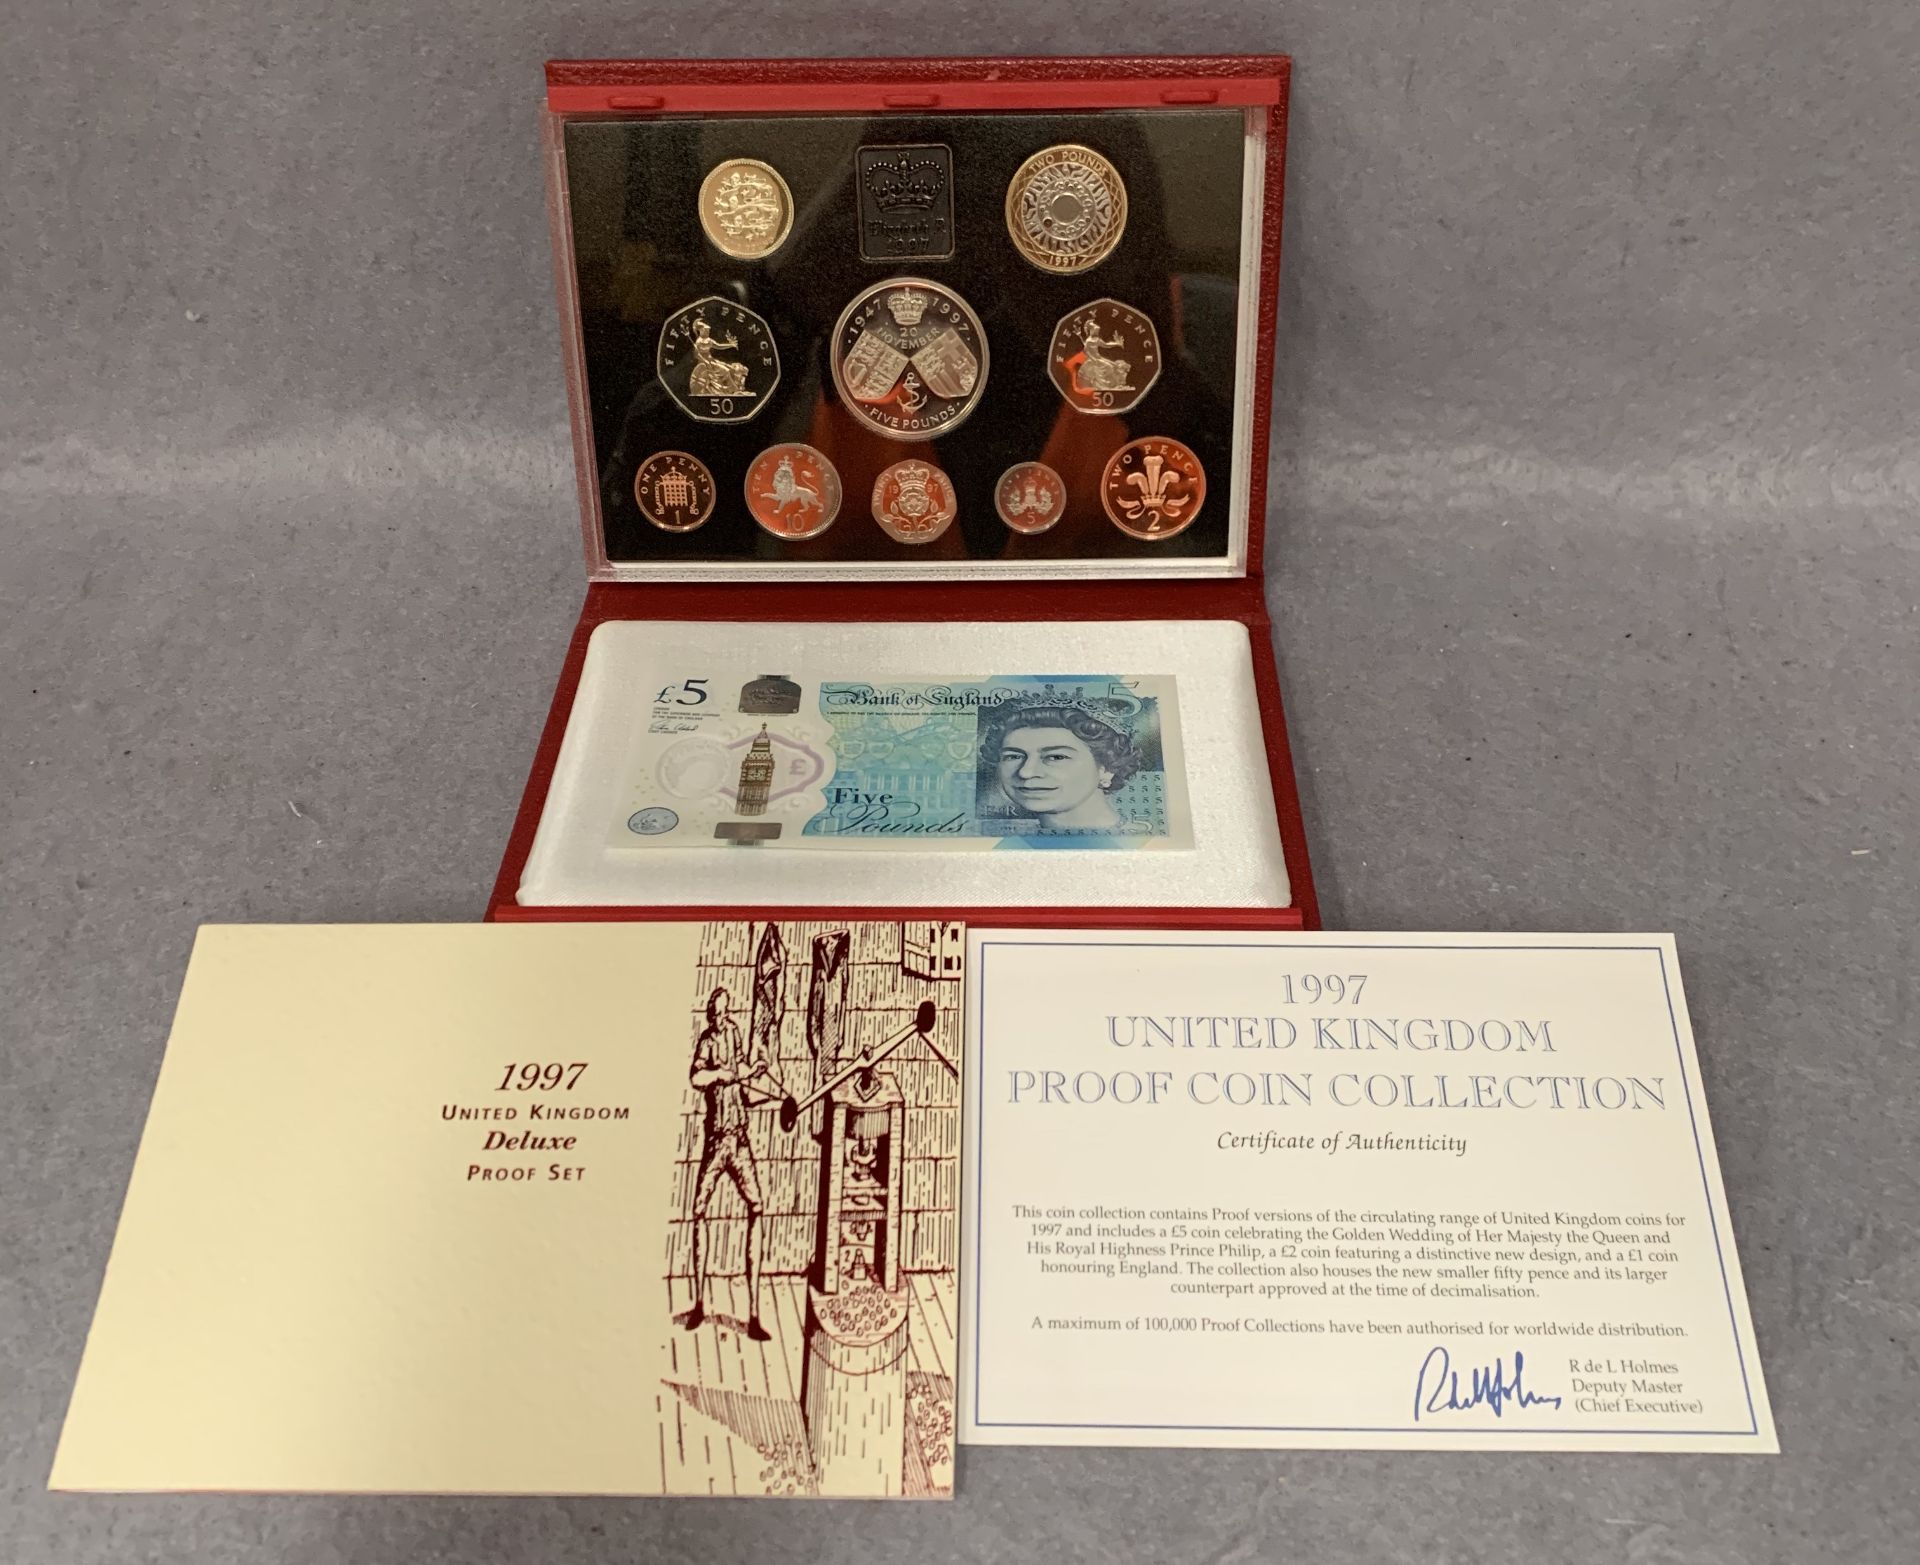 A 1997 UK cased proof coin collection produced by the Royal Mint complete with certificate of